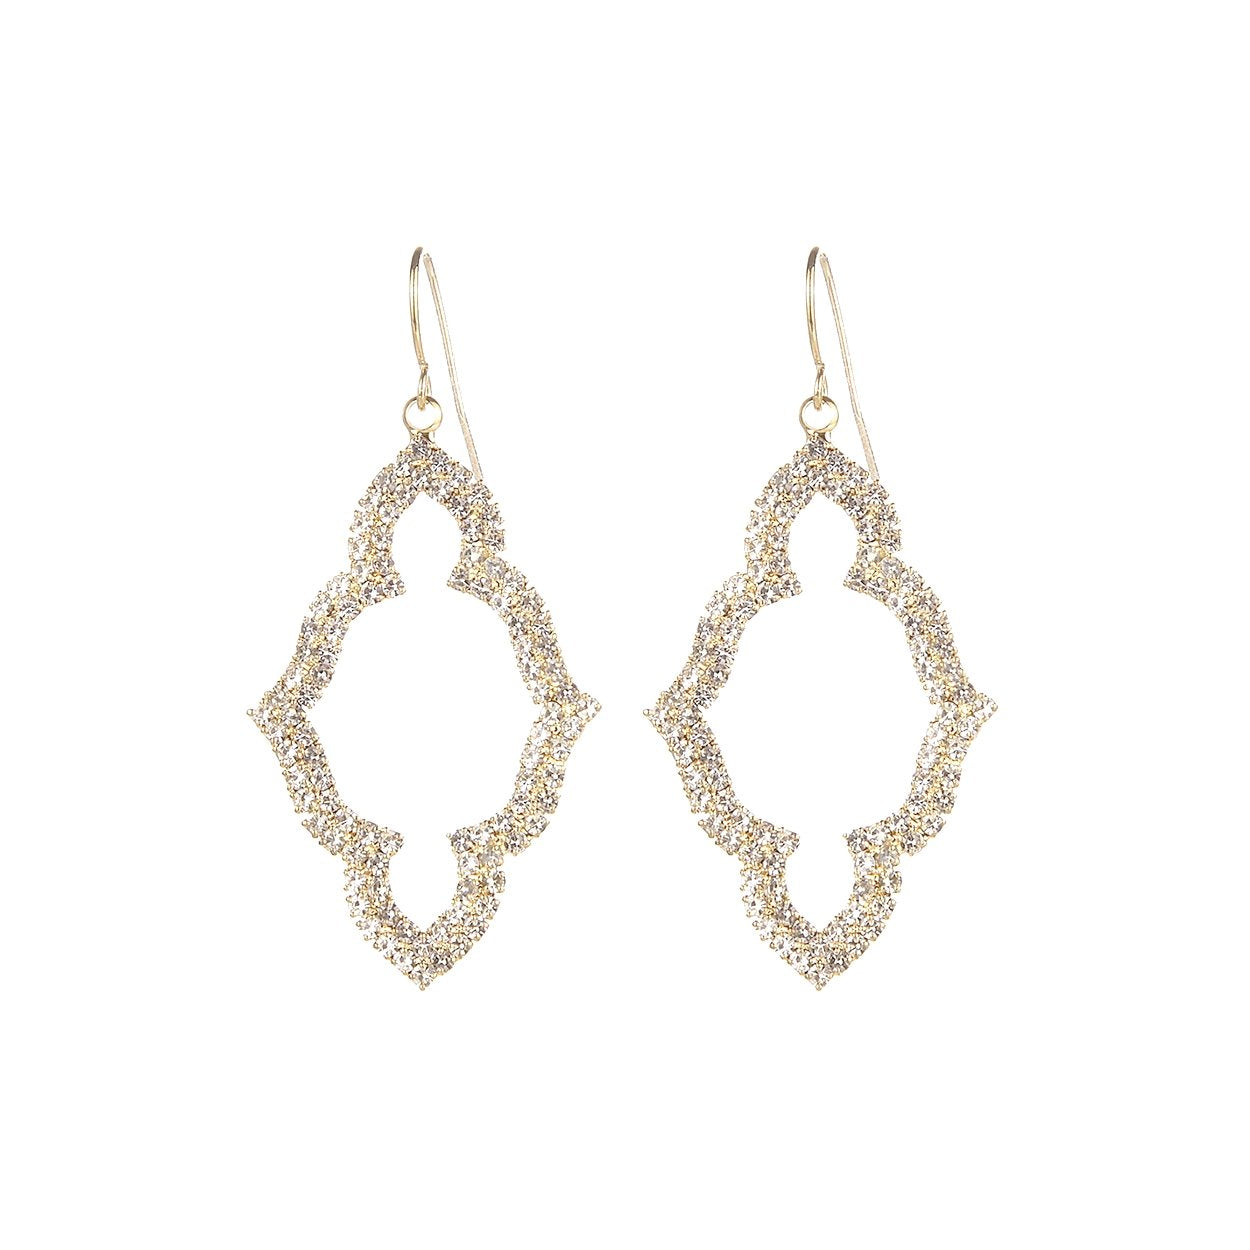 Moroccan Shaped Stunning Pave Crystal Elongated Barbed Quatrefoil Dangle Earrings St. Patrick's Day, 2" (Double Row Gold Tone Clear Crystal)